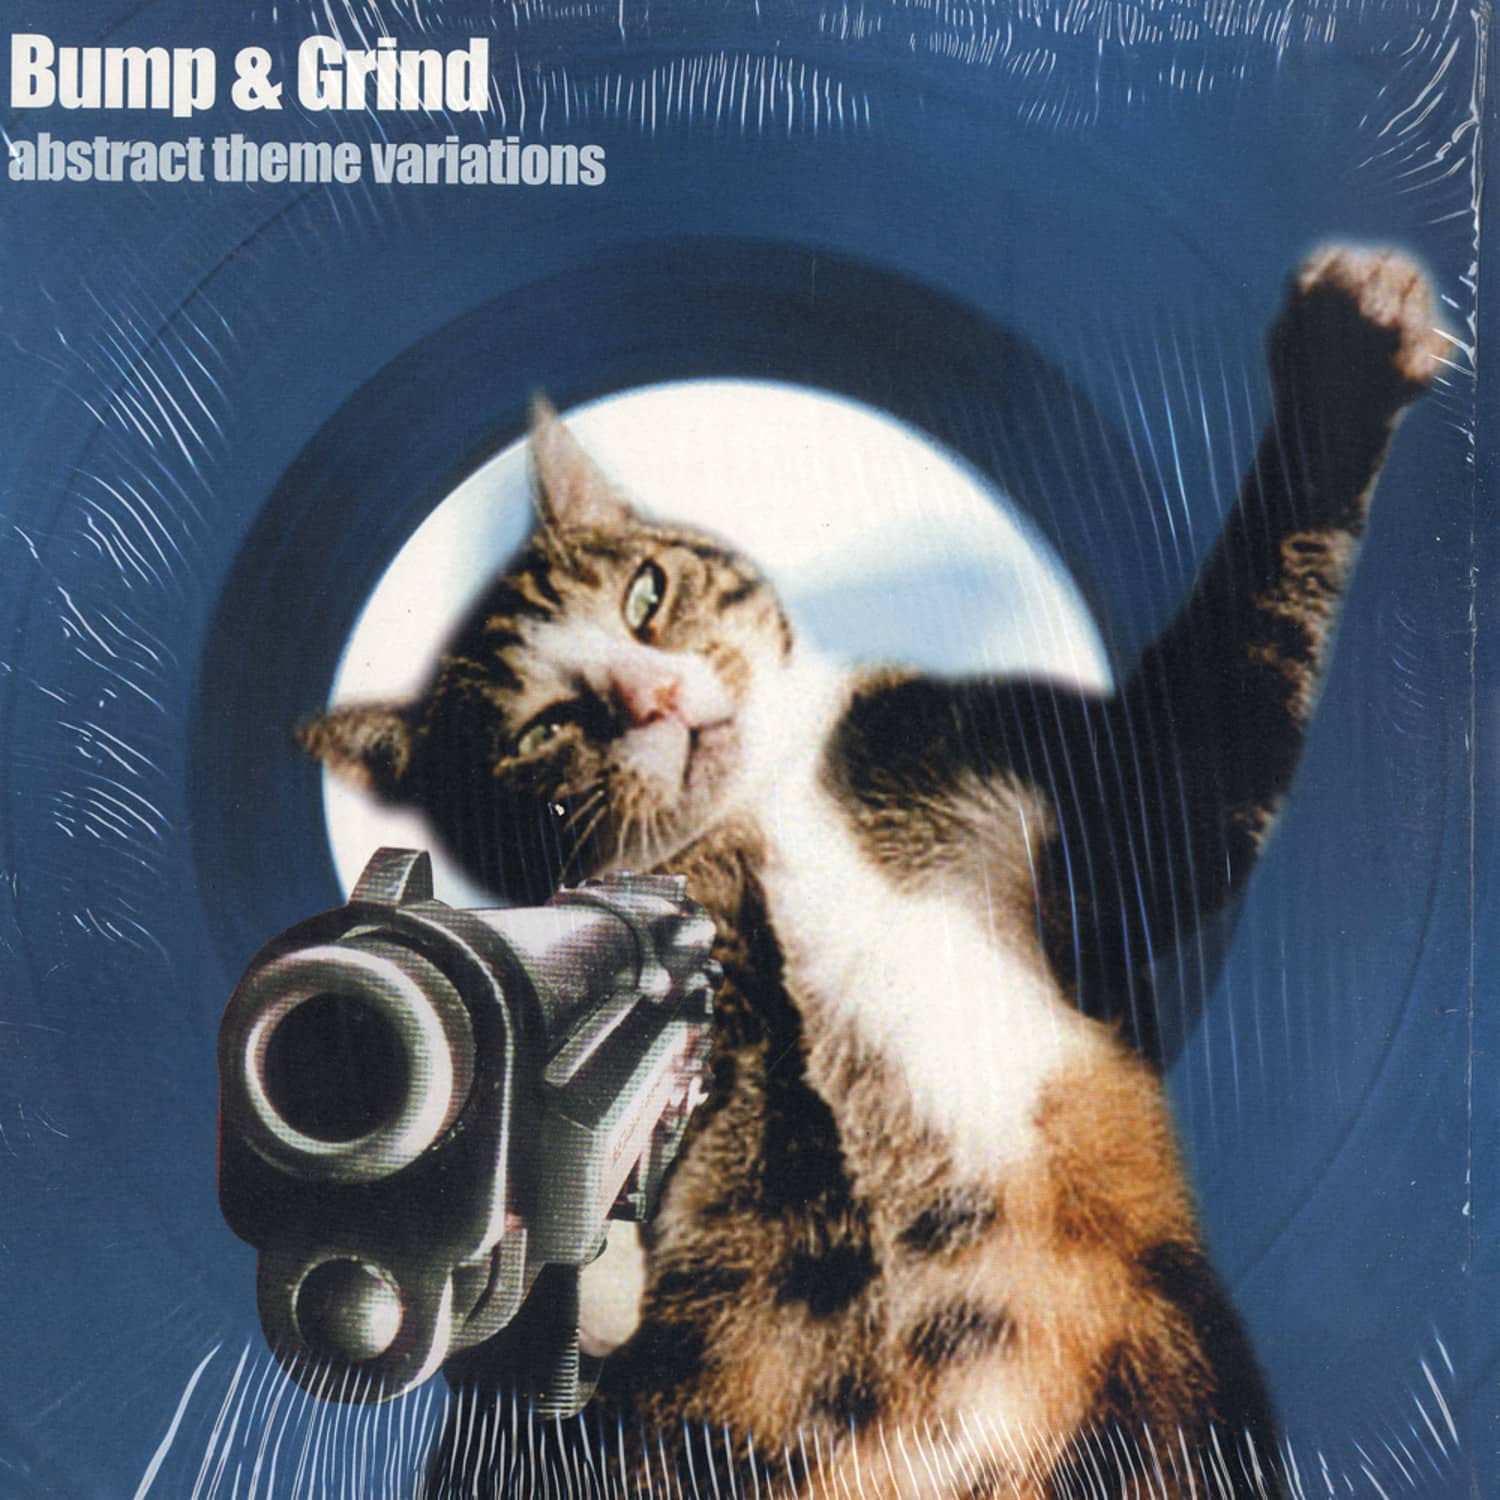 Bump & Grind - ABSTRACT THEME VARIATIONS 